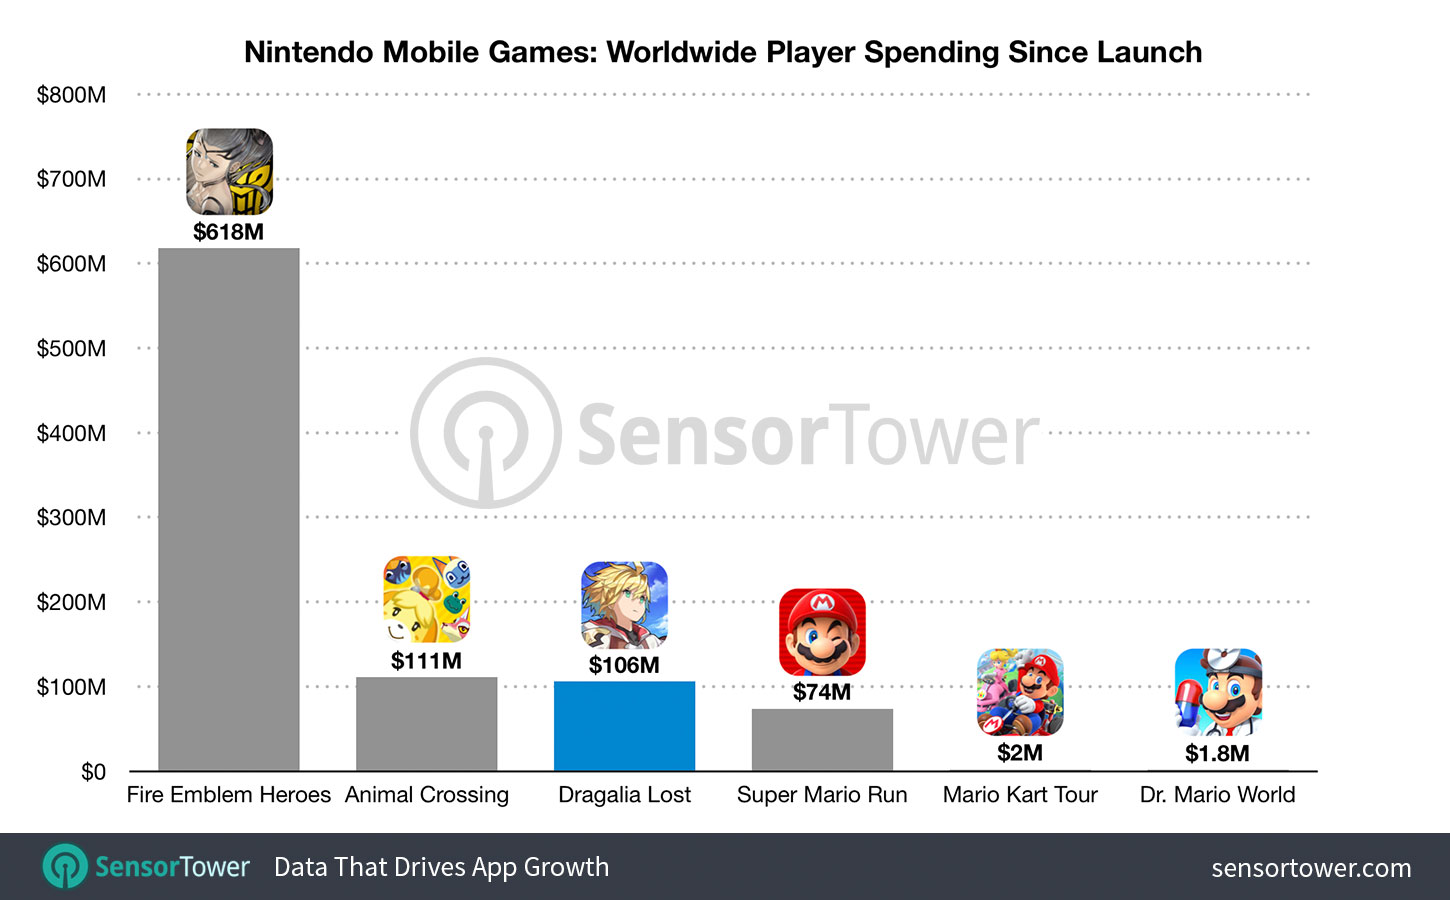 Nintendo Mobile Games: Worldwide Player Spending Since Launch